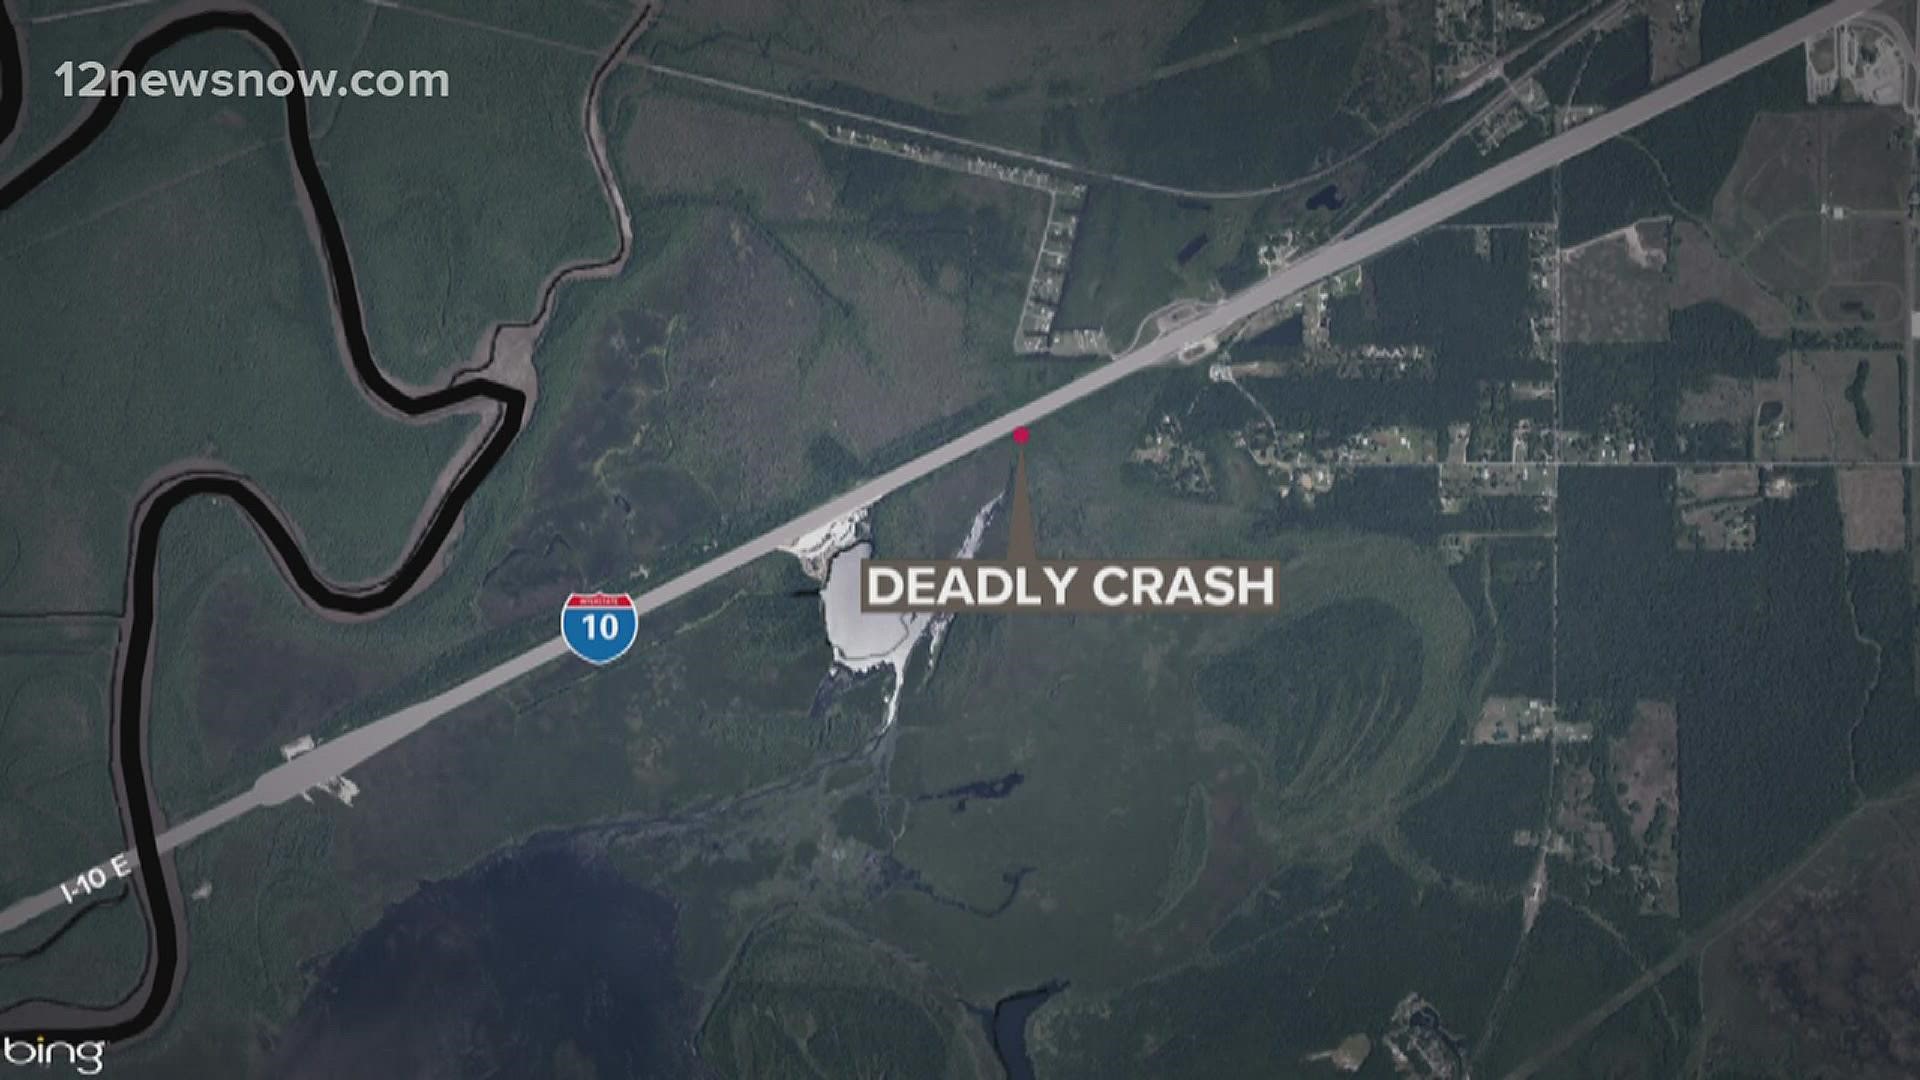 A Tuesday night multi-vehicle wreck involving two 18-wheelers in Louisiana claimed the life of a woman from Orange.